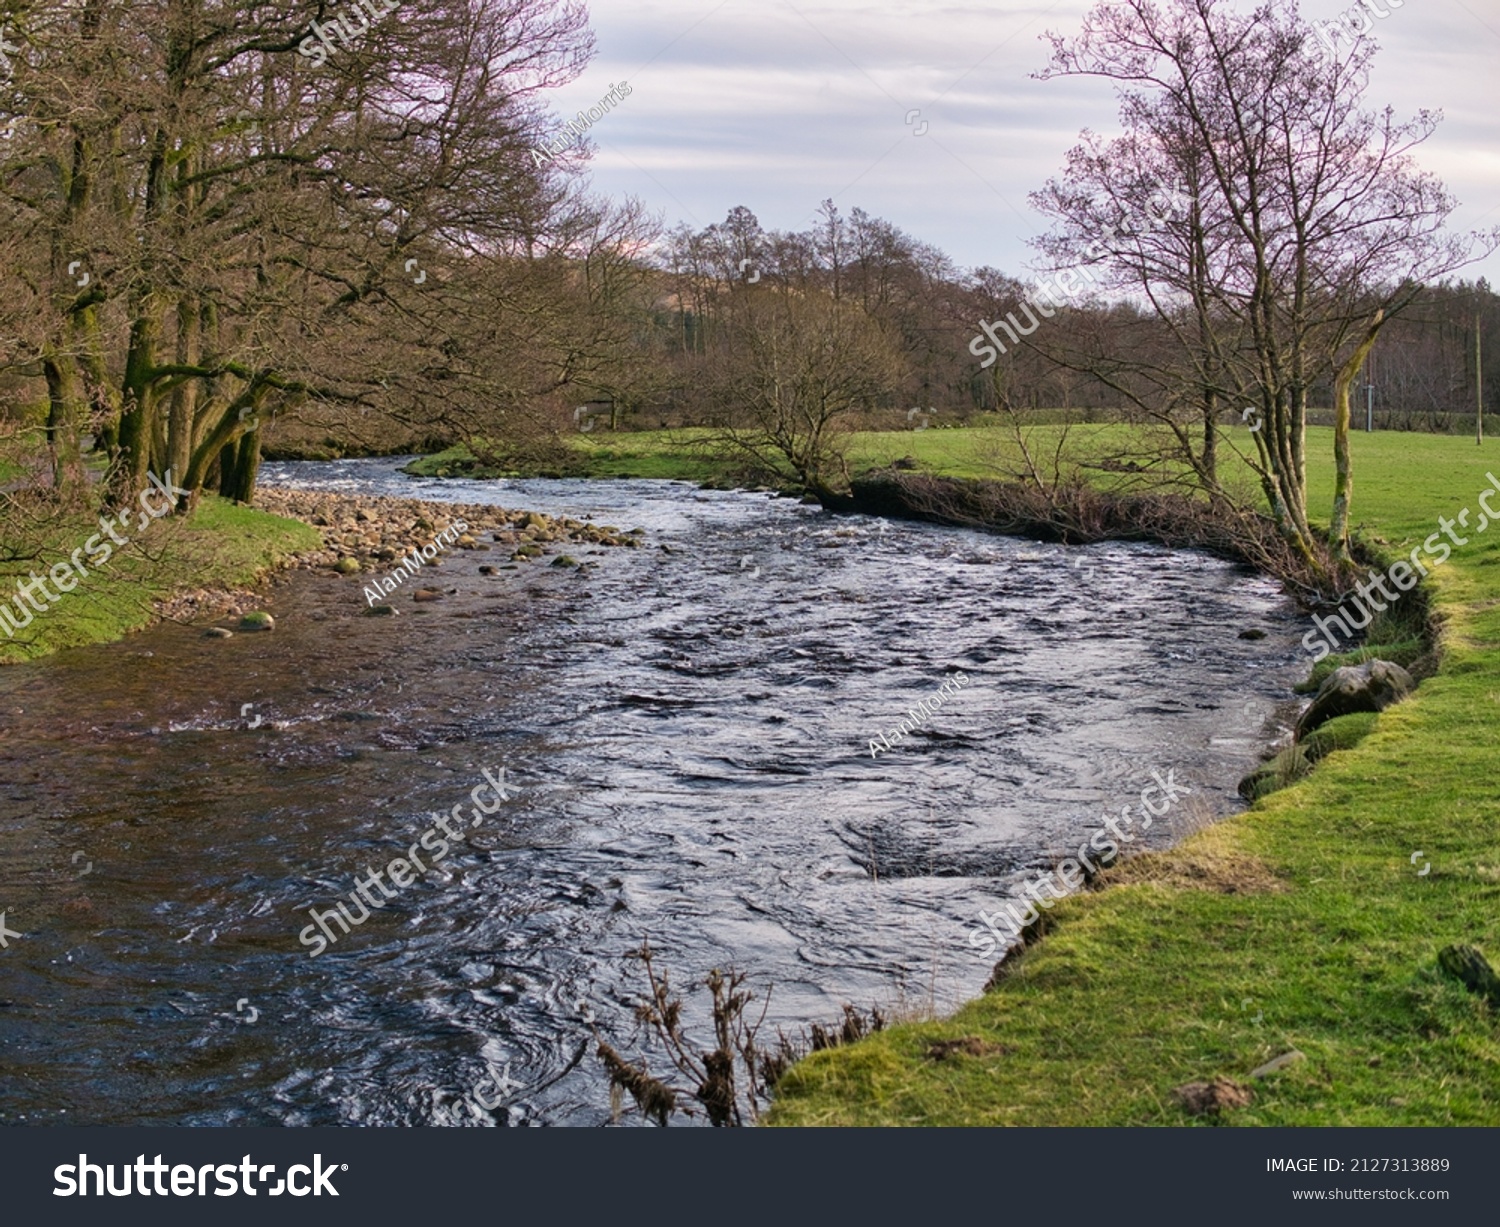 A meander in the River Dunsop near Dunsop Bridge in Lancashire, UK. On the left rock debris on the slip-off slope is visible while on the right, lateral erosion has formed a small river cliff. #2127313889